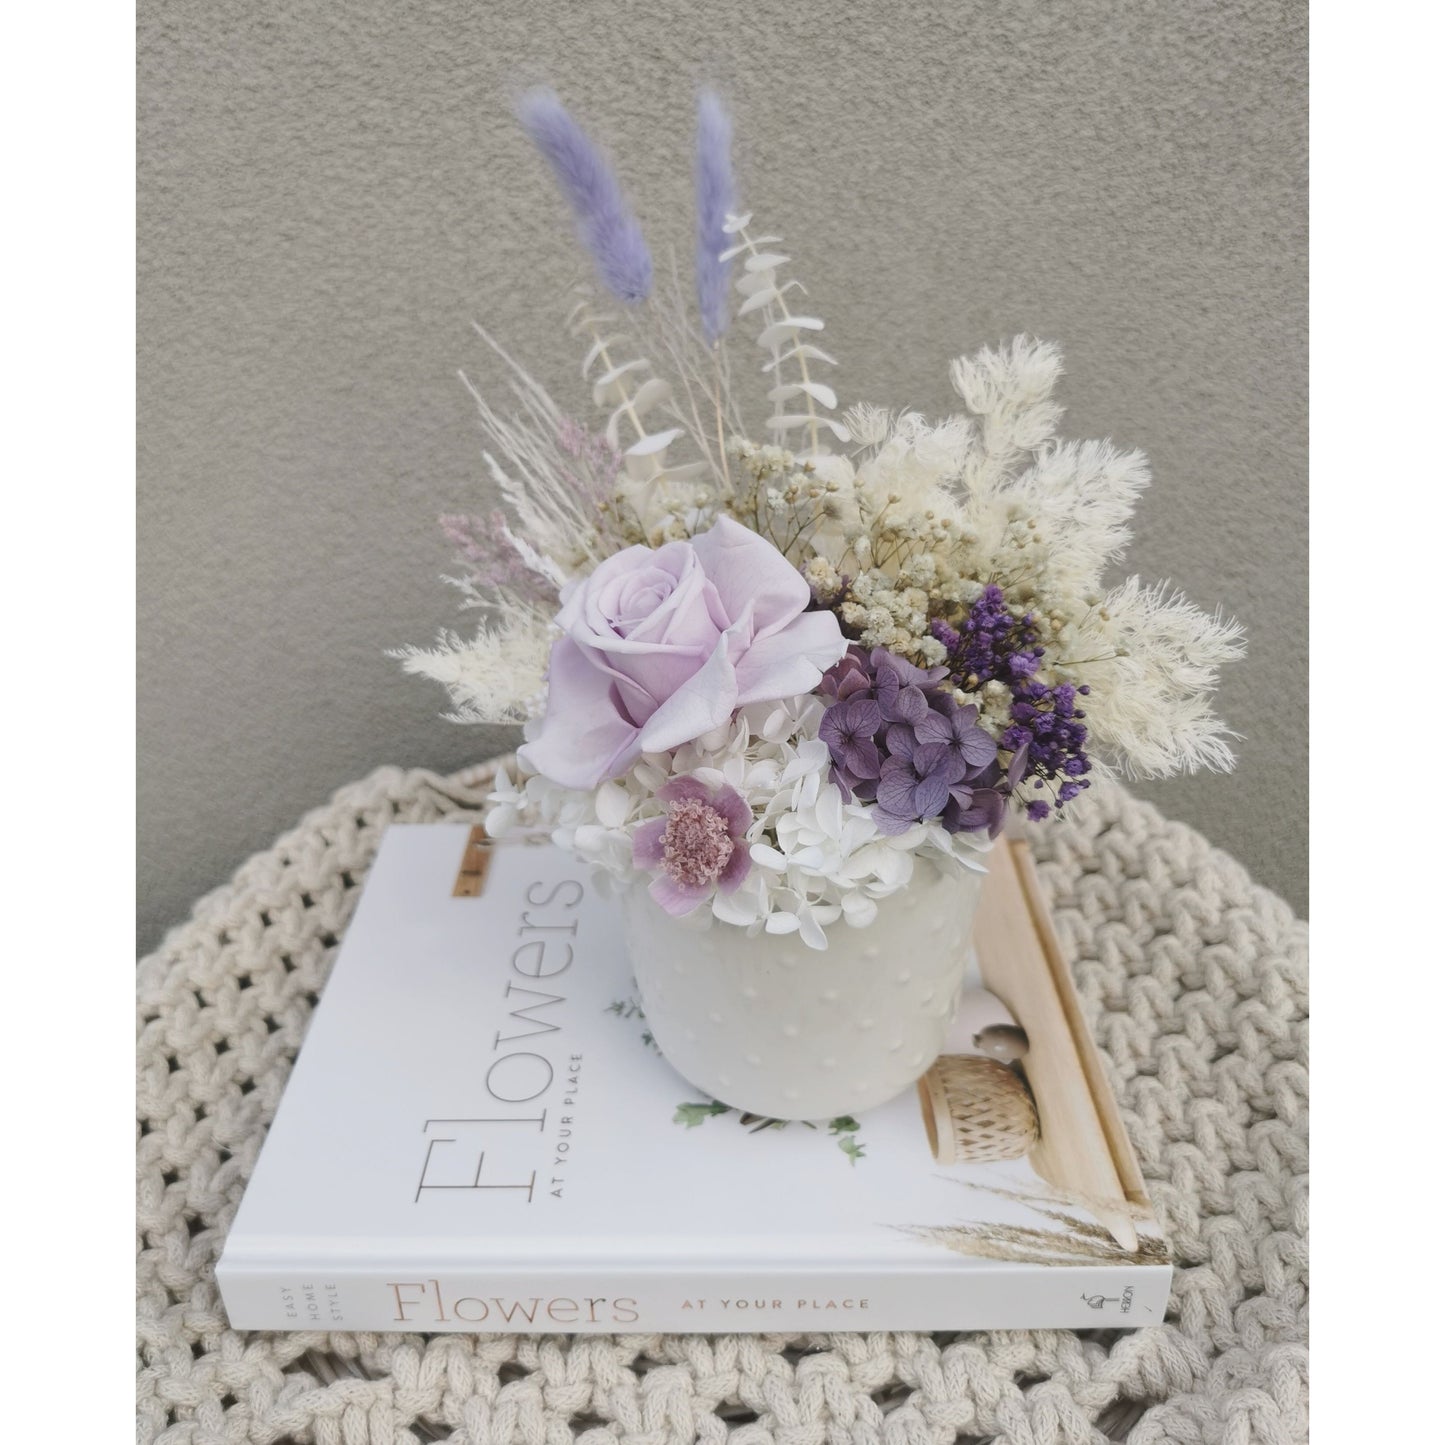 Dried & Preserved flower arrangement in purple & white and featuring a purple preserved rose and nestled in to a white pot. Photo shows arrangement sitting on a book on a table against a blank wall